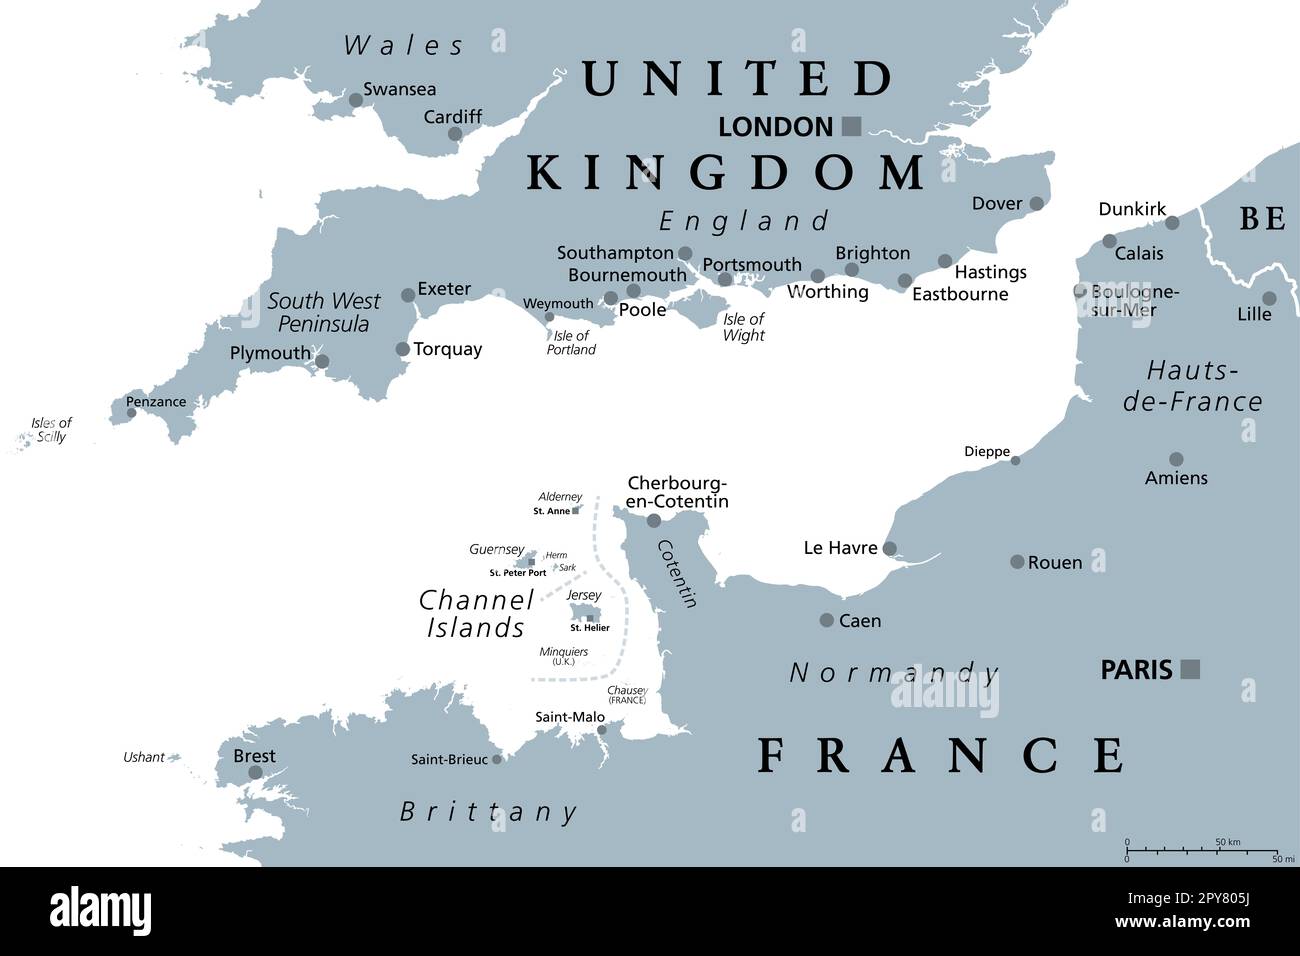 English Channel, gray political map. British Channel, arm of Atlantic Ocean, separates England from France. Busiest shipping area in the world. Stock Photo